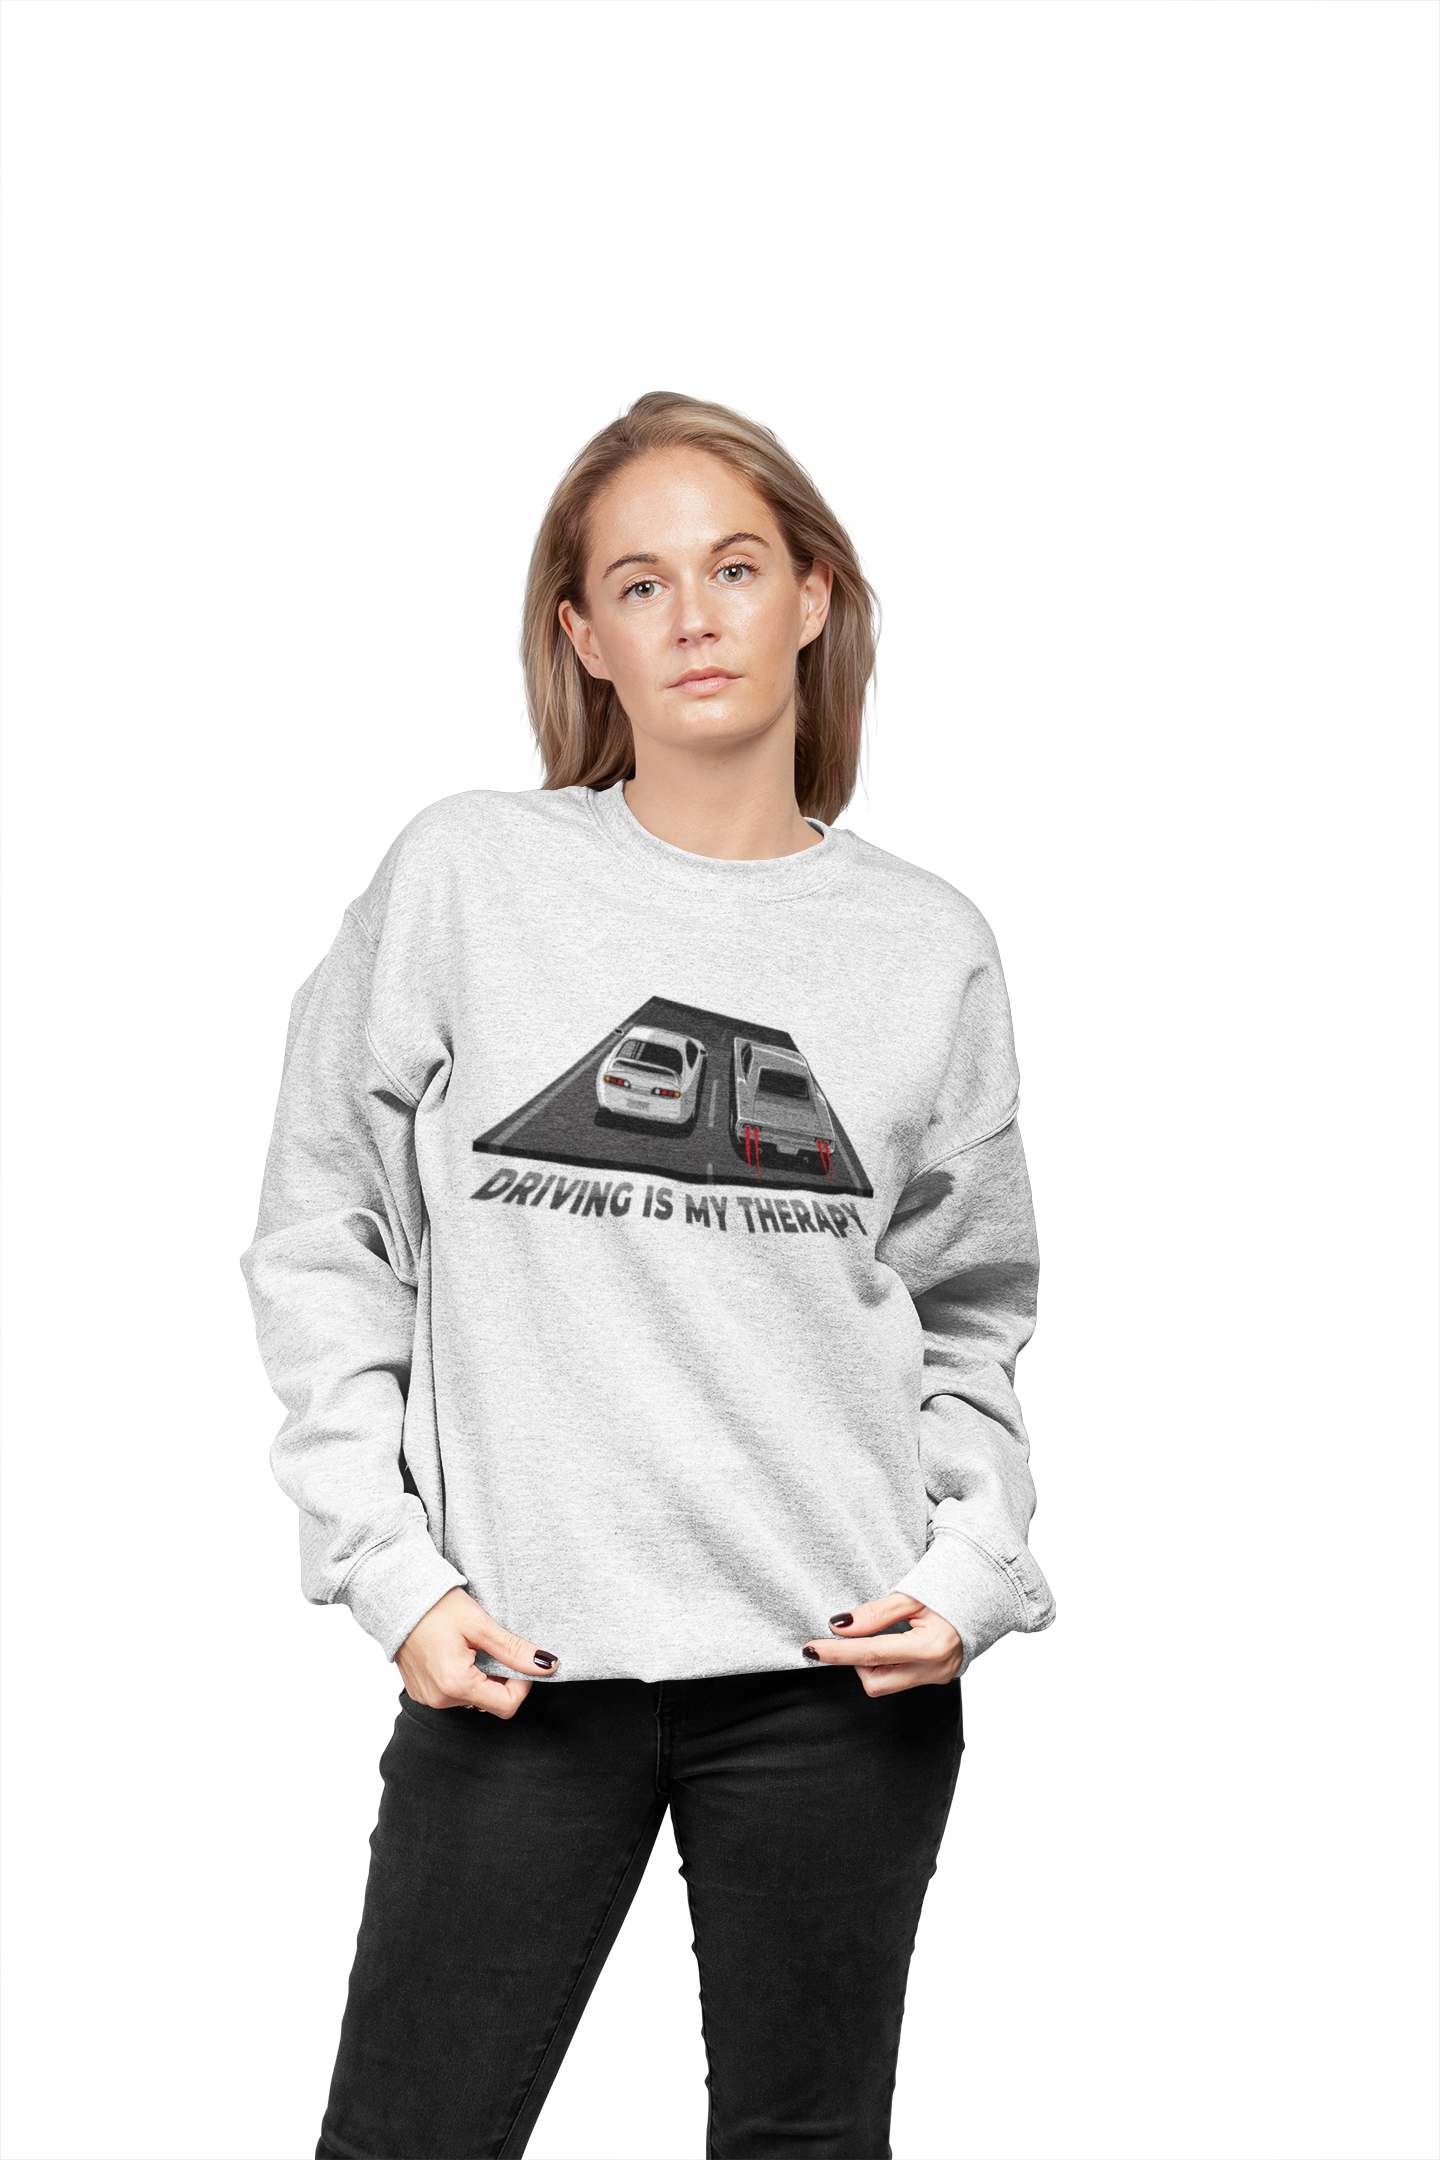 DRIVING IS MY THERAPY - Unisex Sweatshirt